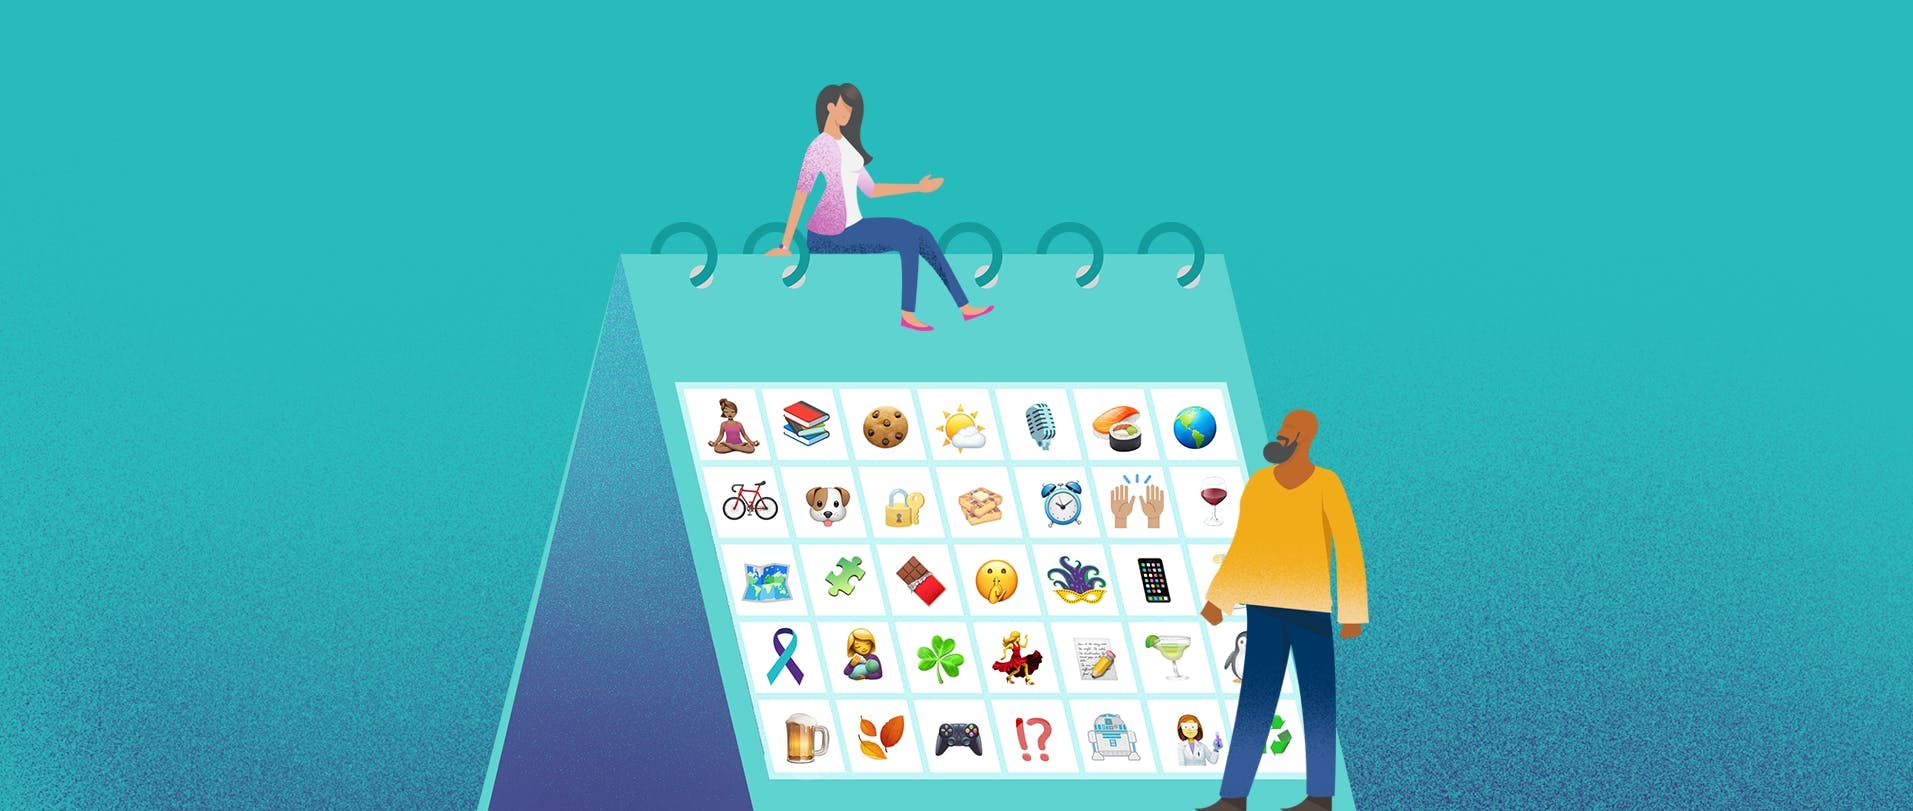 An illustration of a woman and a man standing next to a giant calendar filled with emojis that correspond to different National Days or holidays that social media managers can use when planning their content.